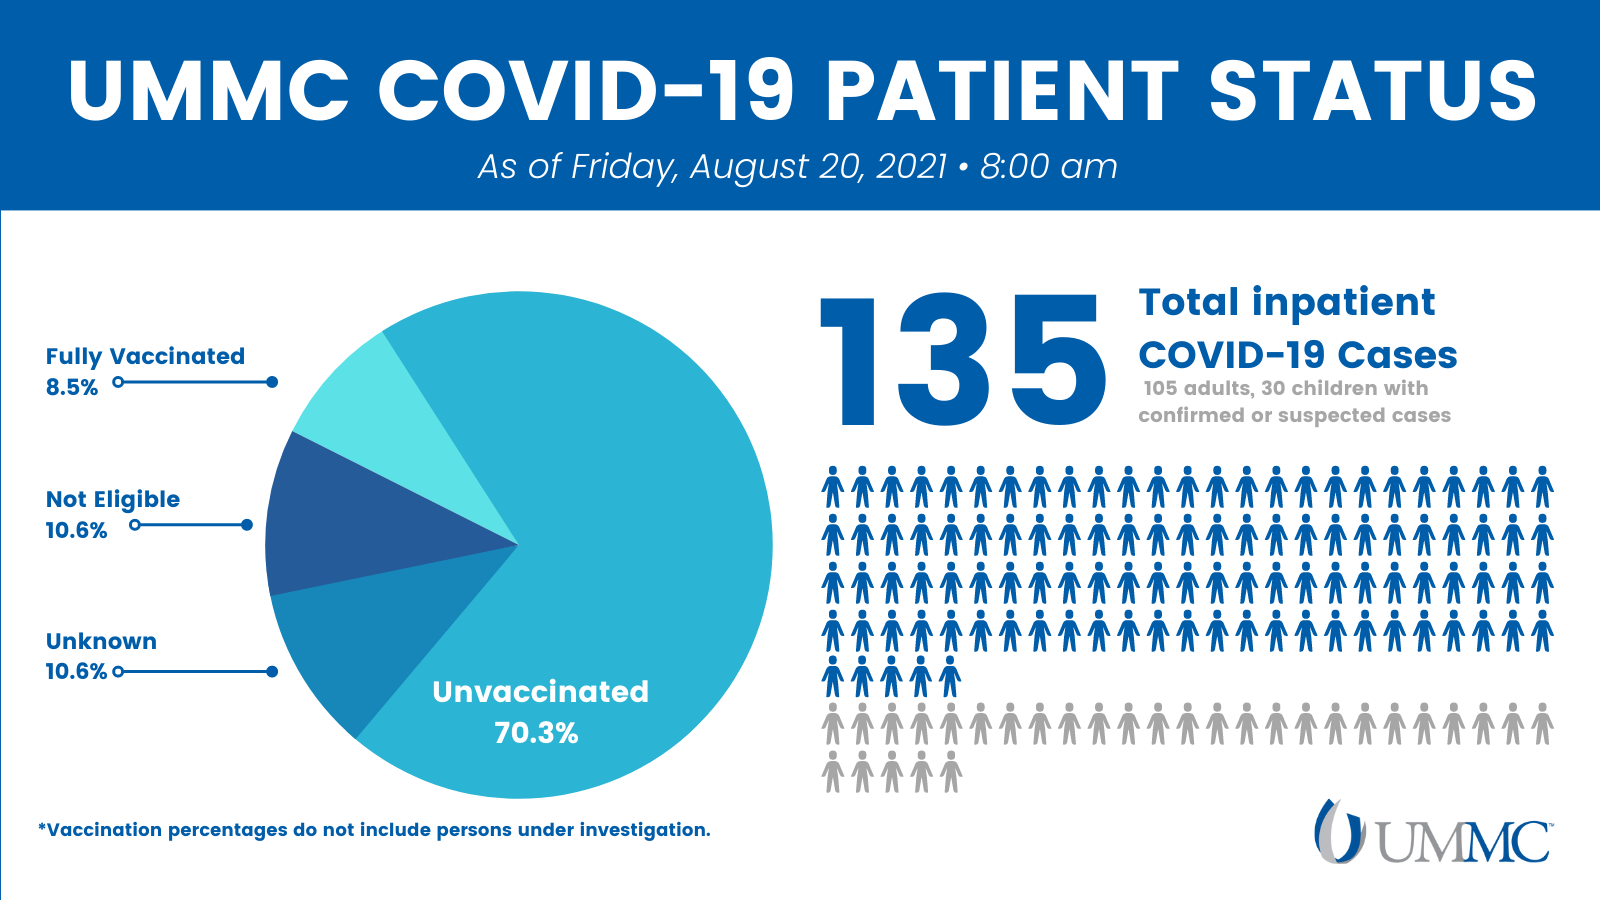 COVID-19 Patient Status Graphic includes a pie chart with the percentage of patients vaccinated and gray/blue figures that illustrate the total inpatient cases broken down by adult and pediatric cases. Click 'Image Description' below to read more.